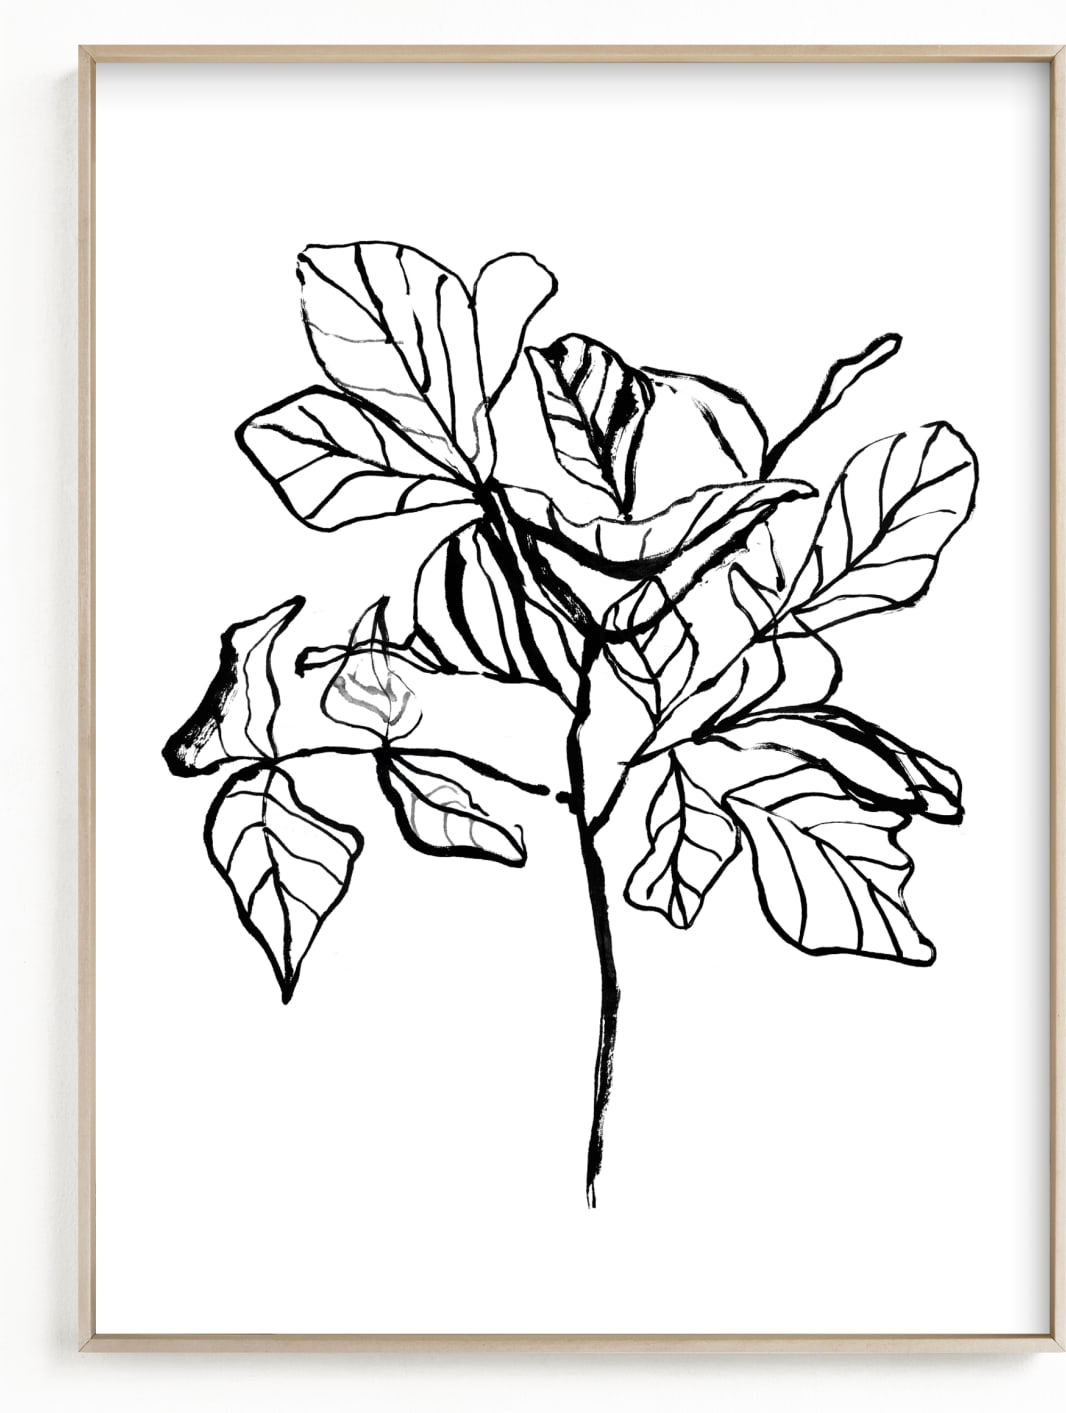 This is a black and white art by Cass Loh called Fiddle-leaf fig tree 2.